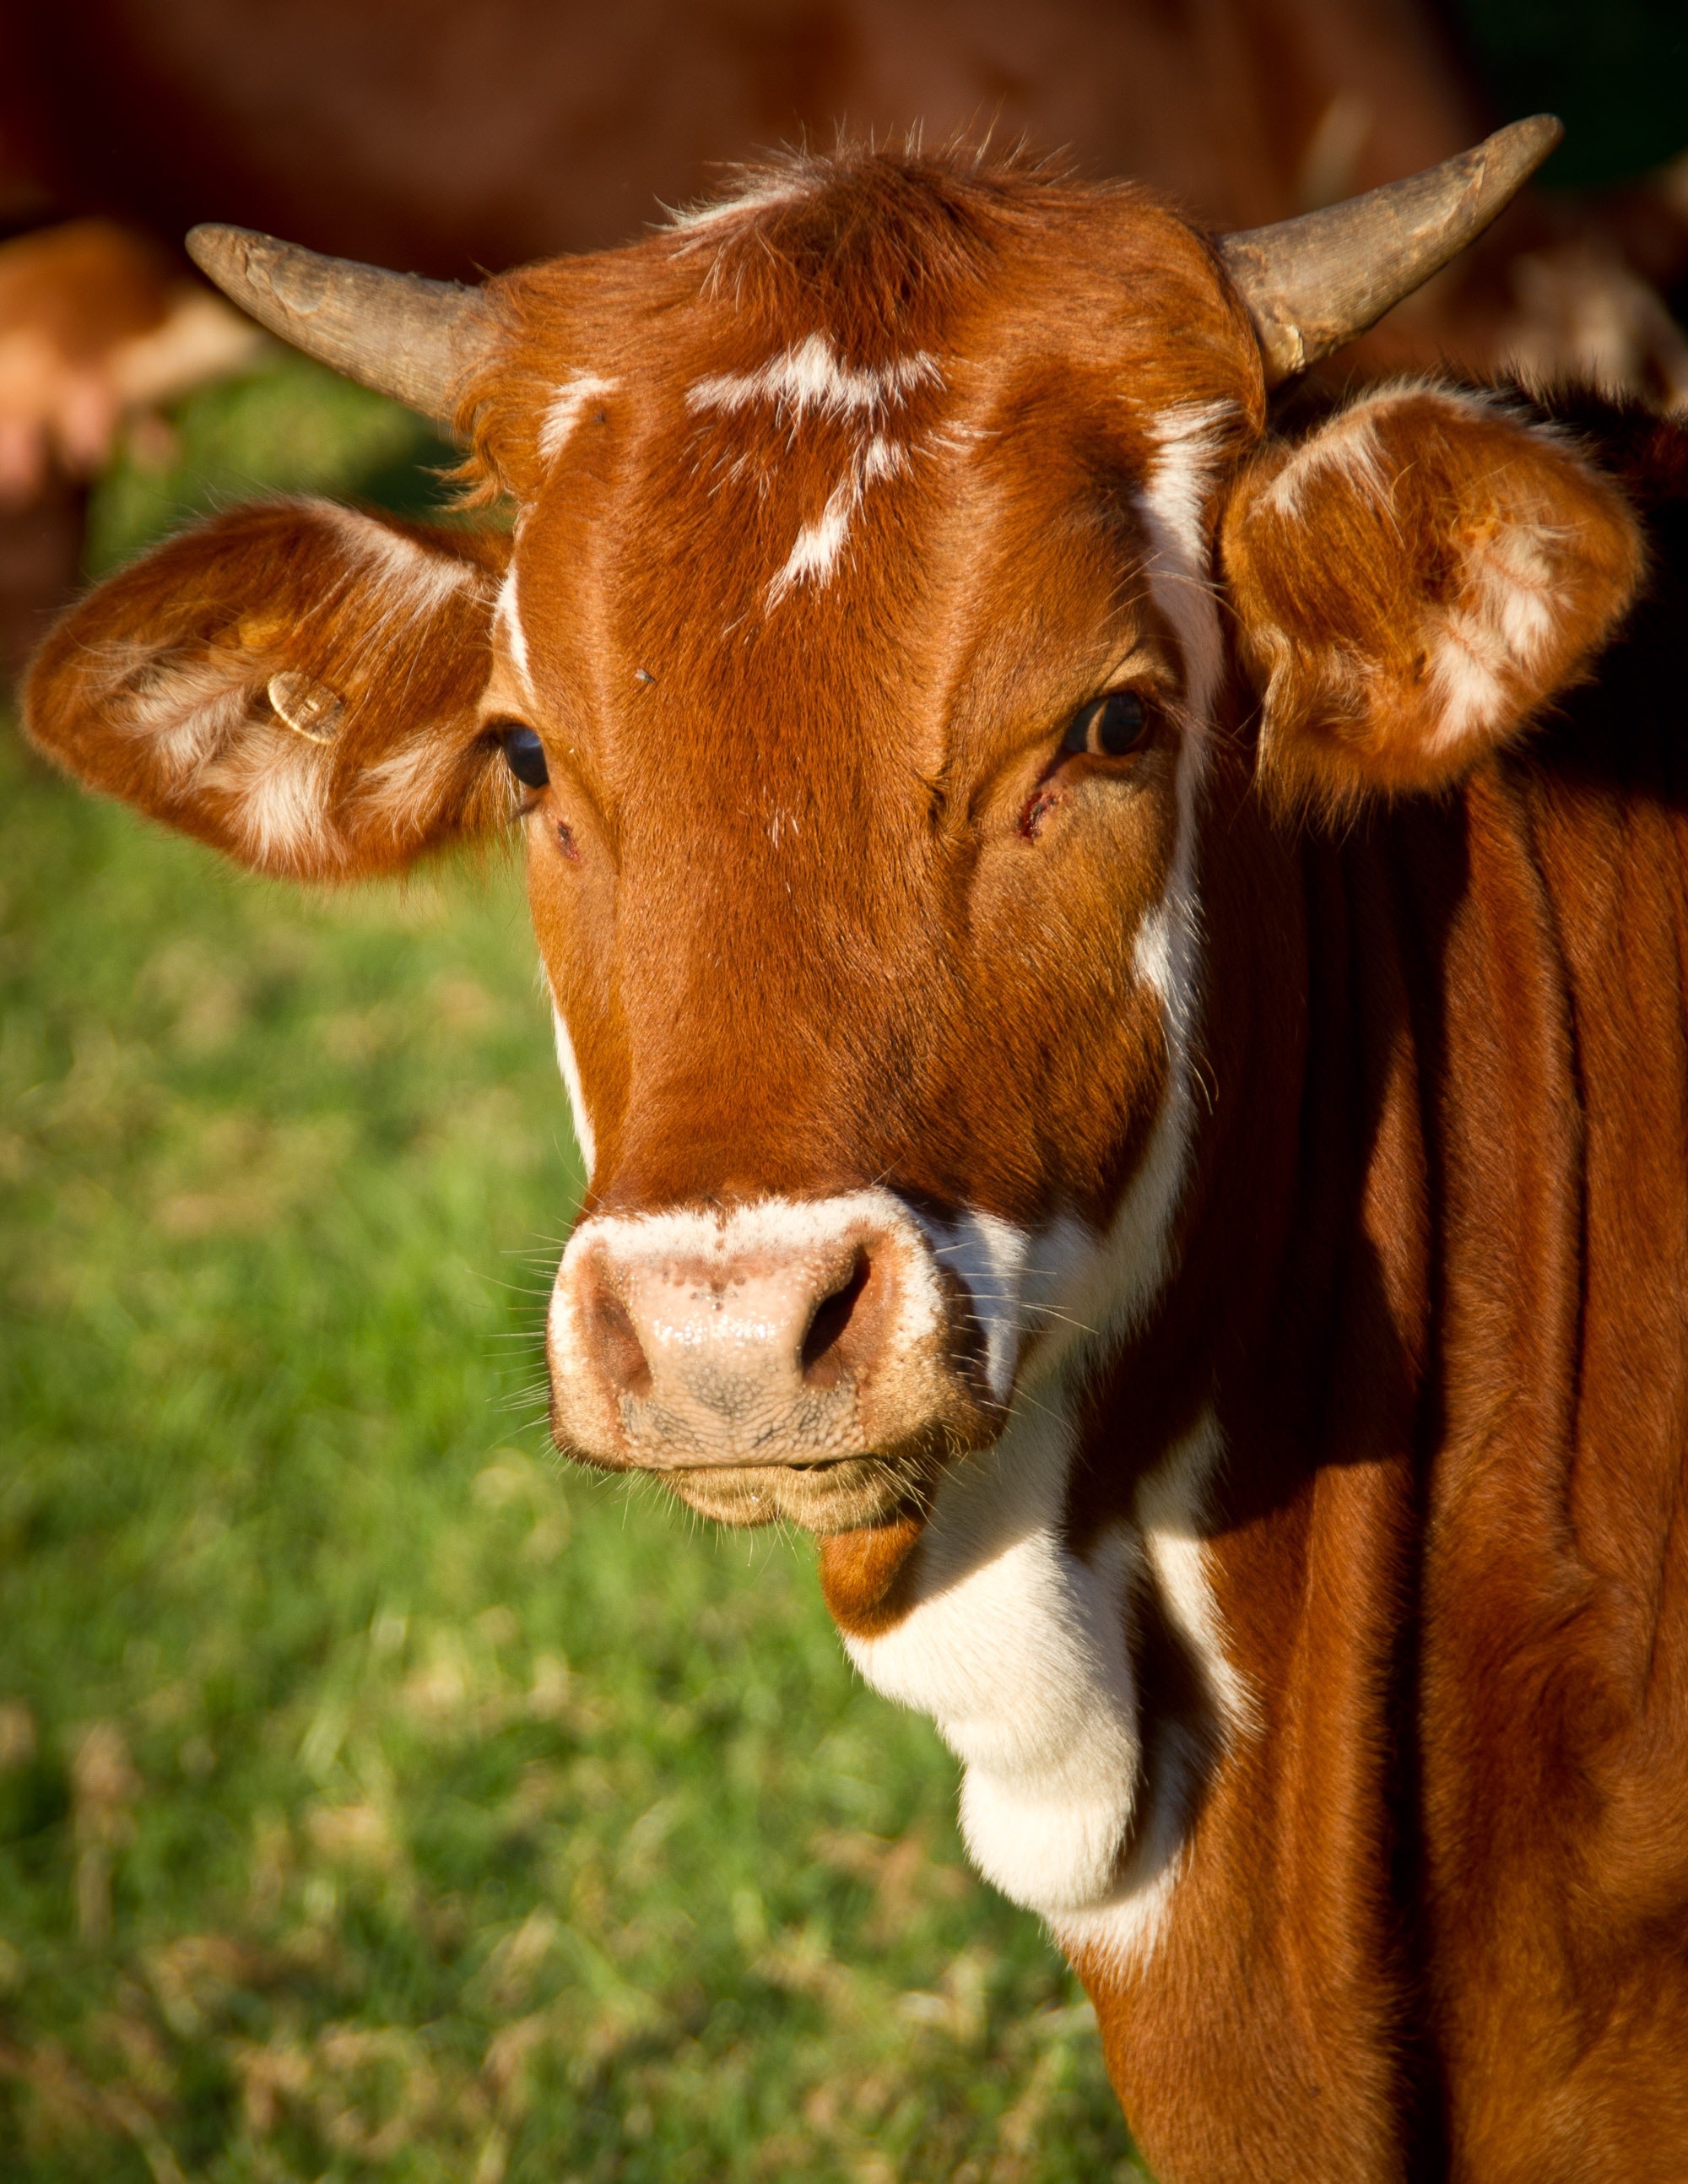 A brown cow